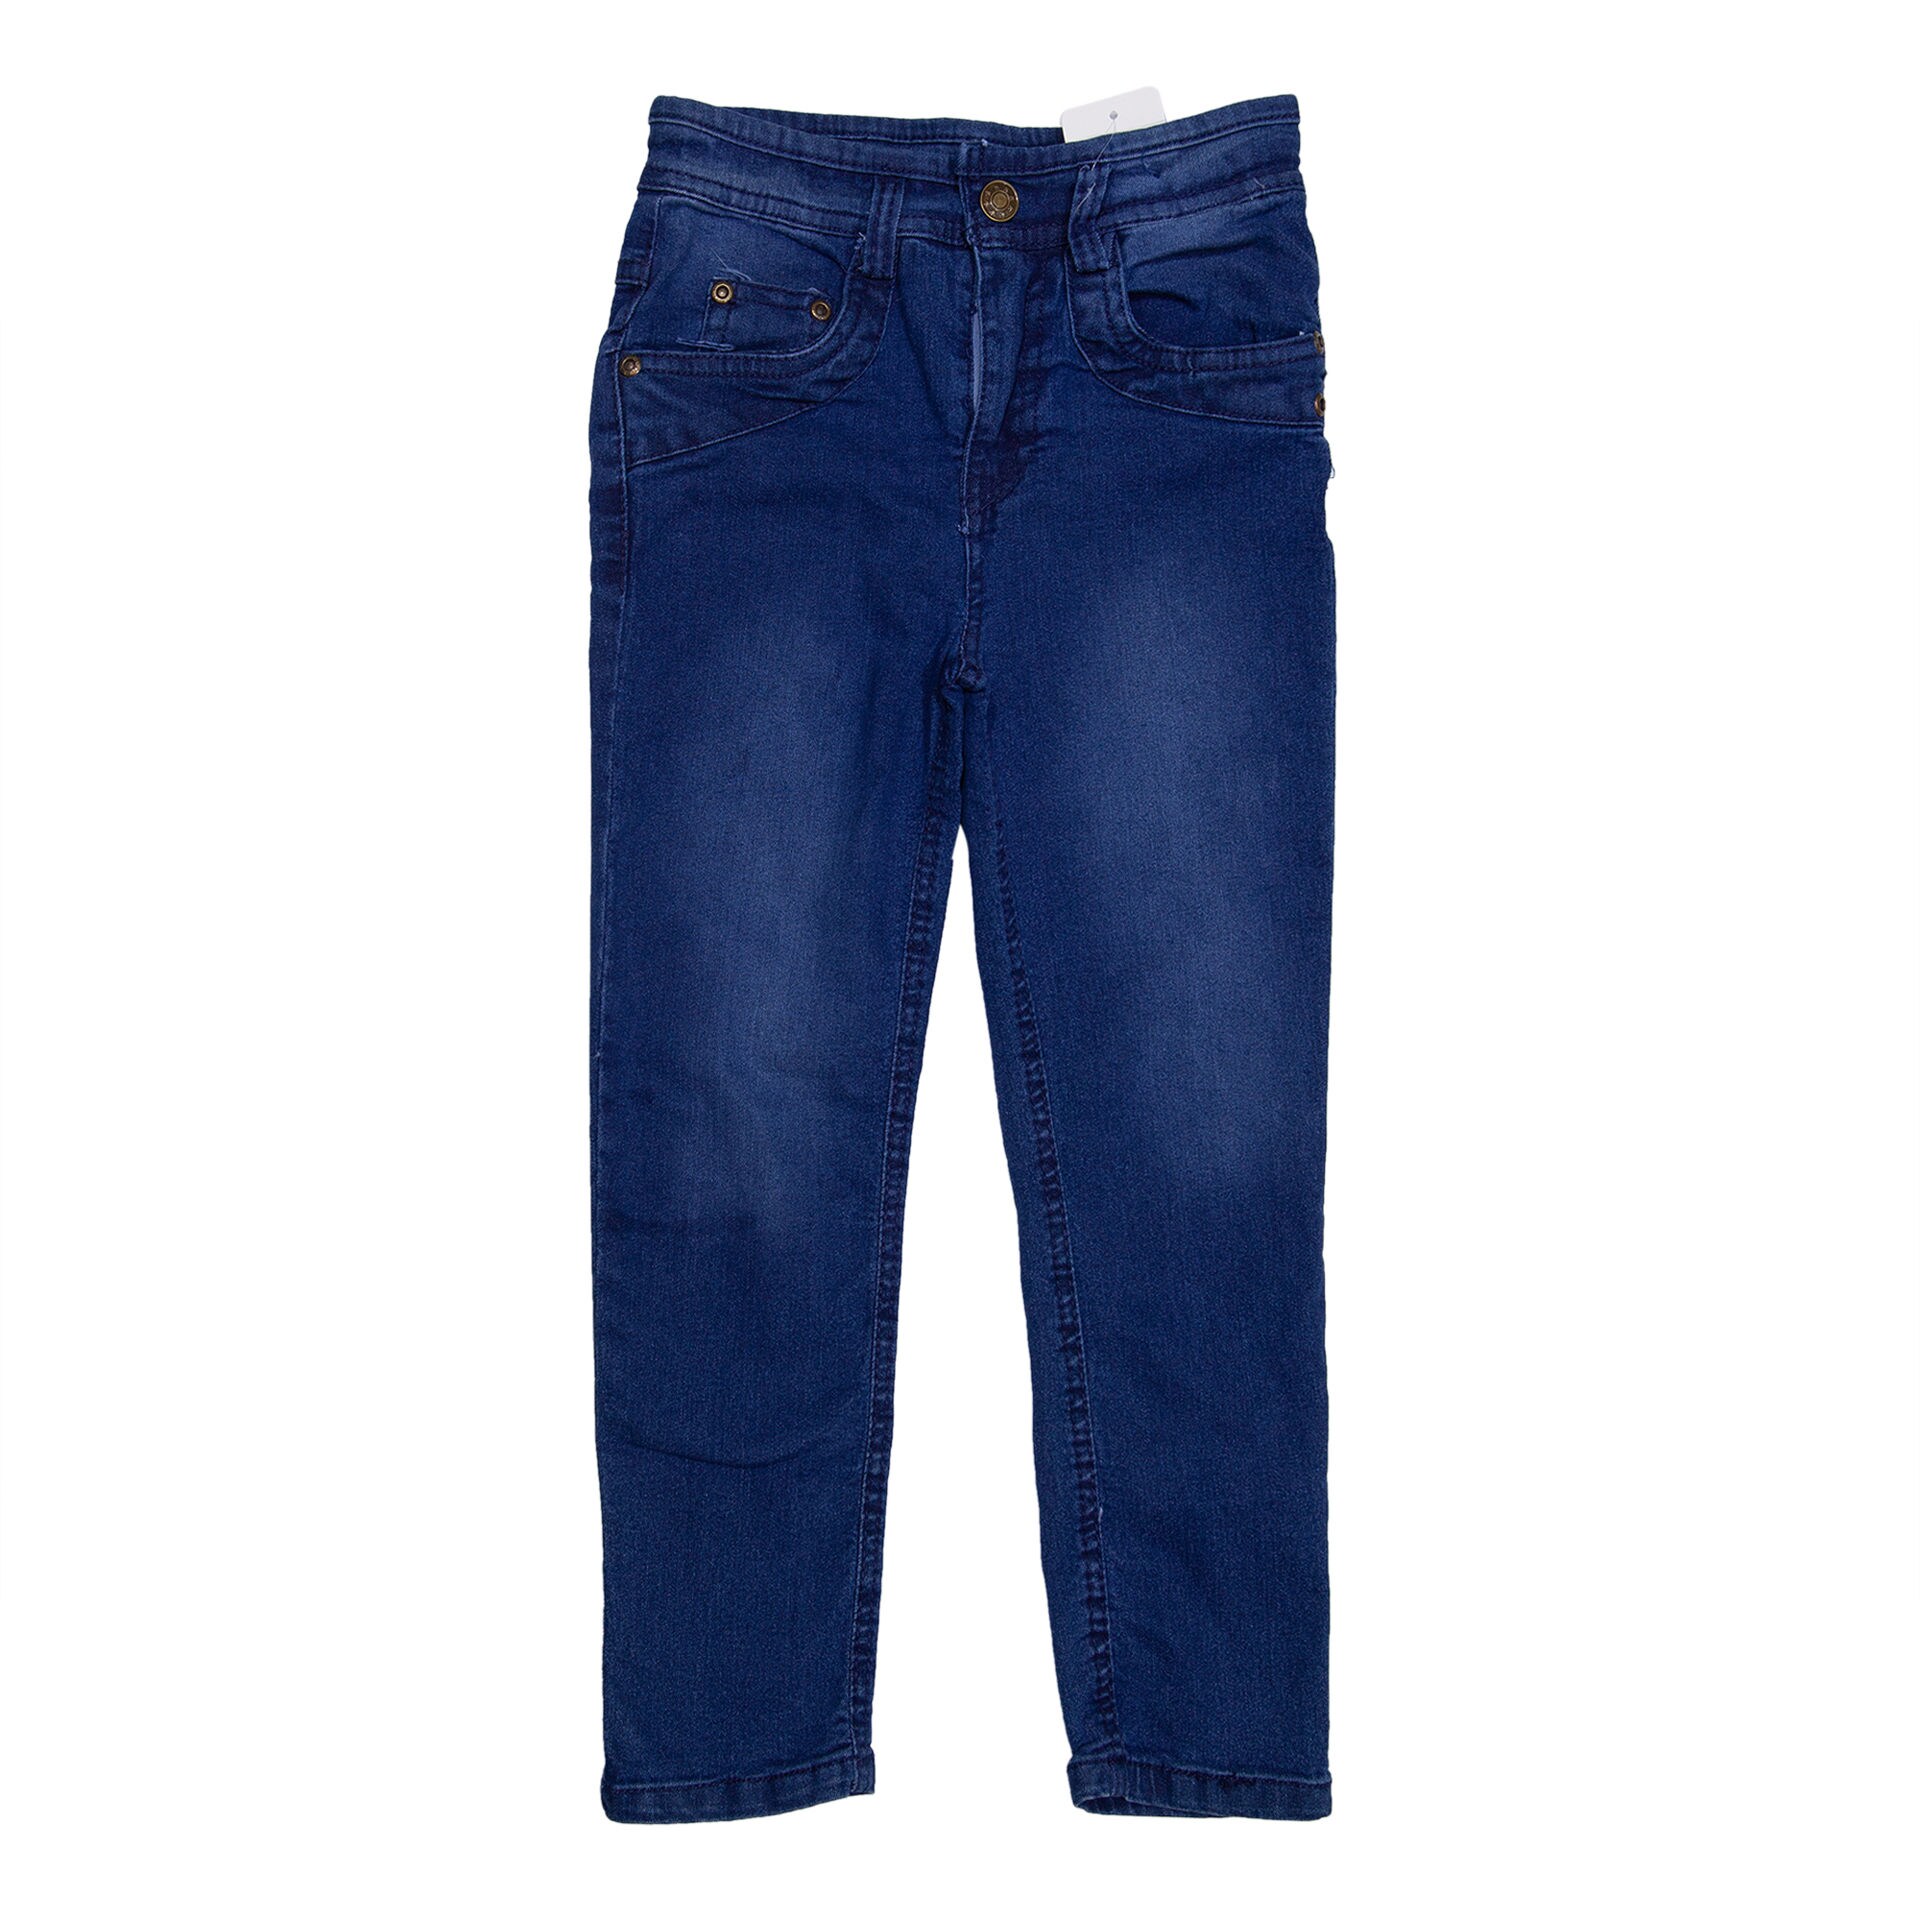 Jeans Online - Buy Stylish & Branded Jeans Online in India - NNNOW